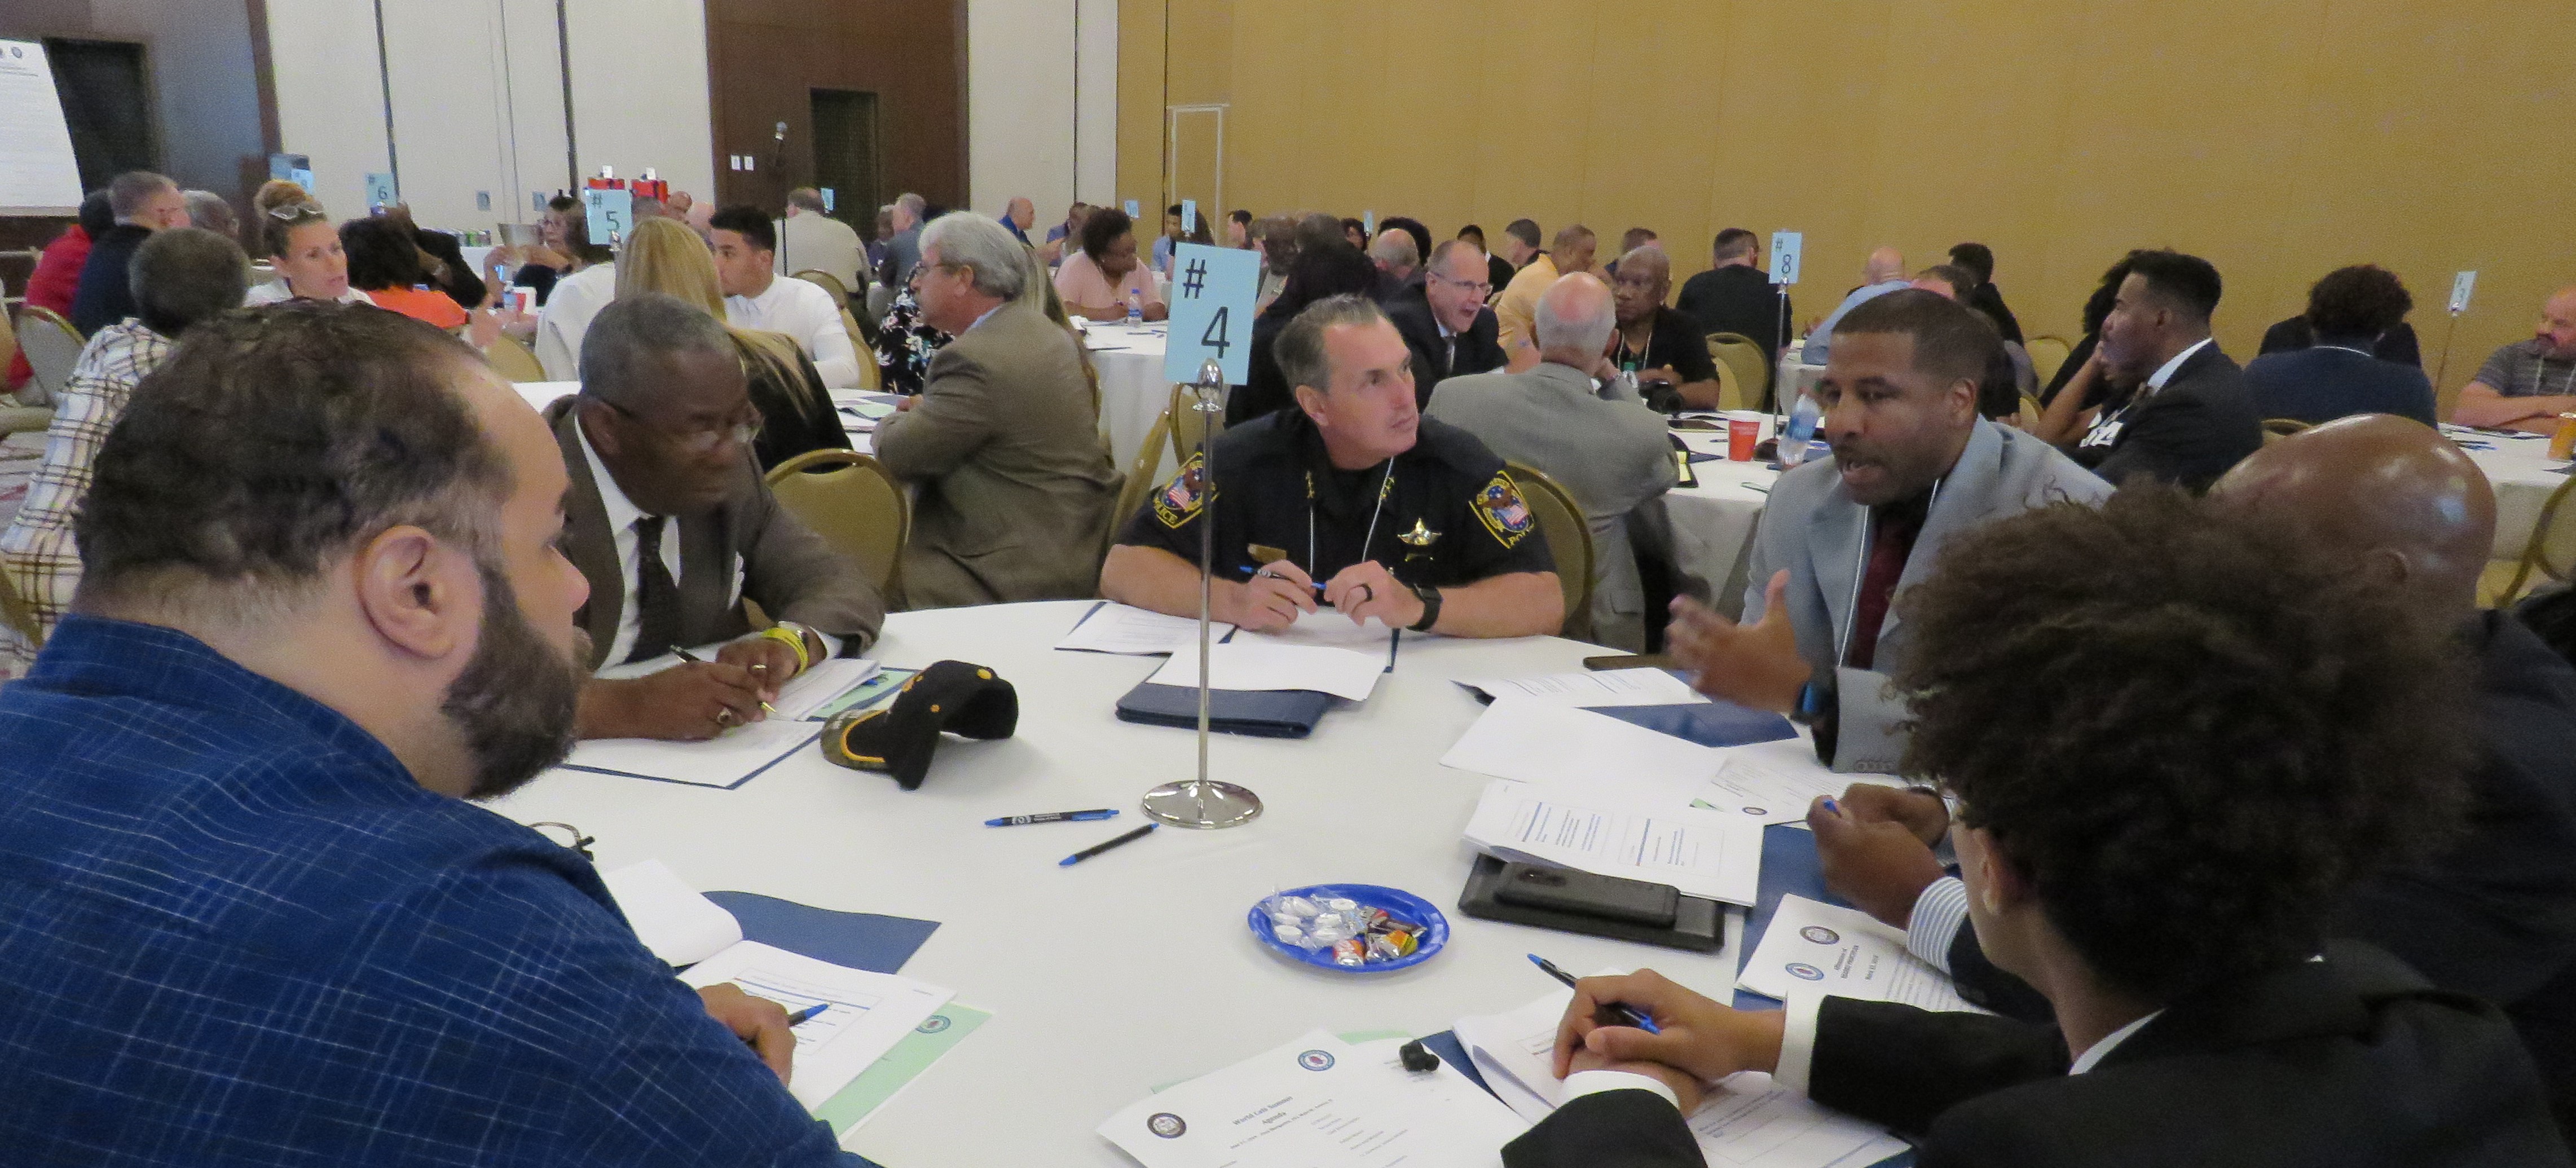 Chief Jim Black at the World Cafe Summit in Peoria on June 27, 2017